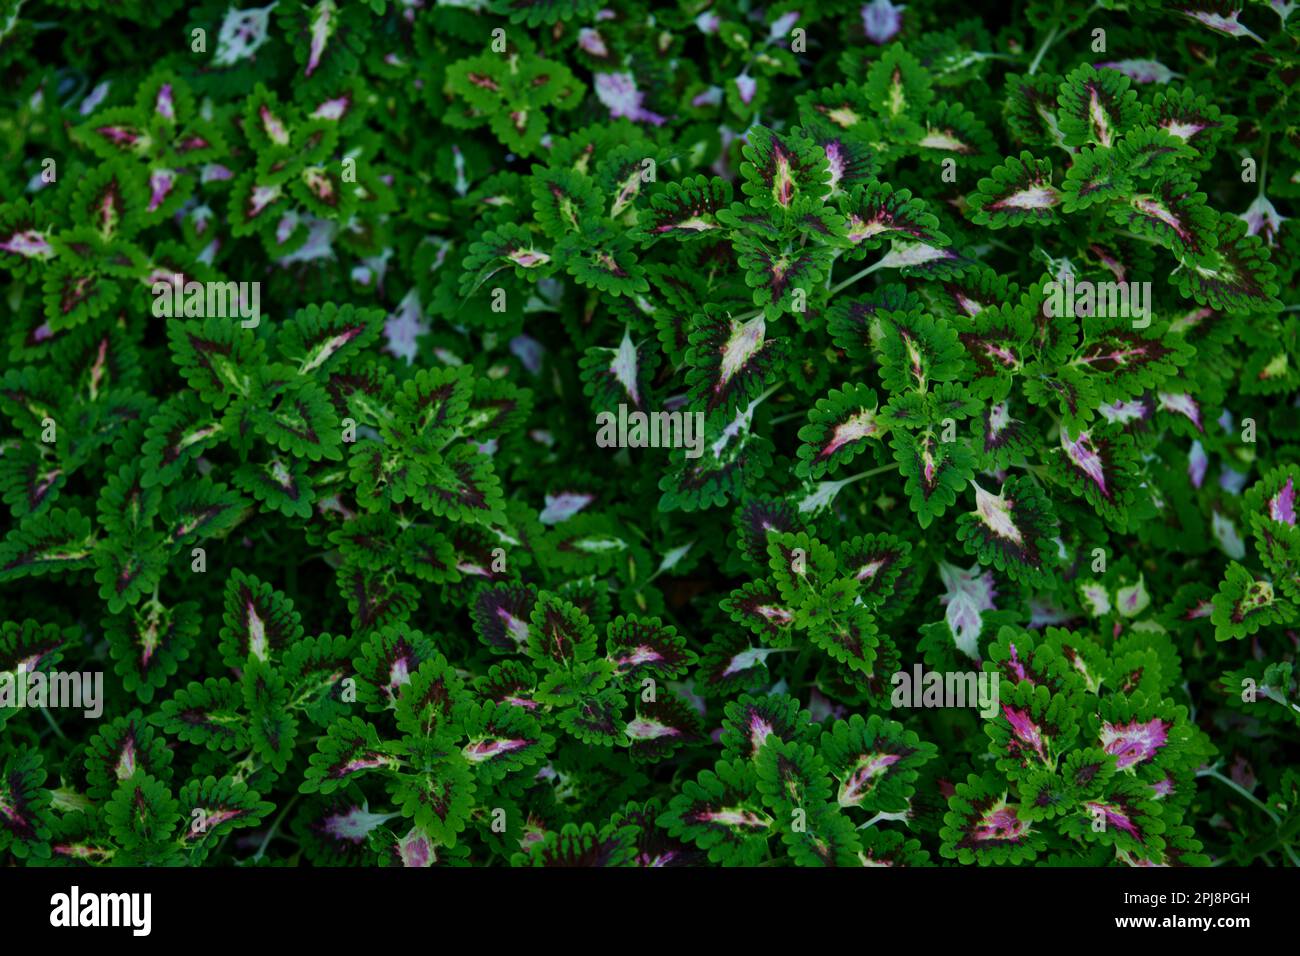 Close-up view of Coleus leaves background Stock Photo